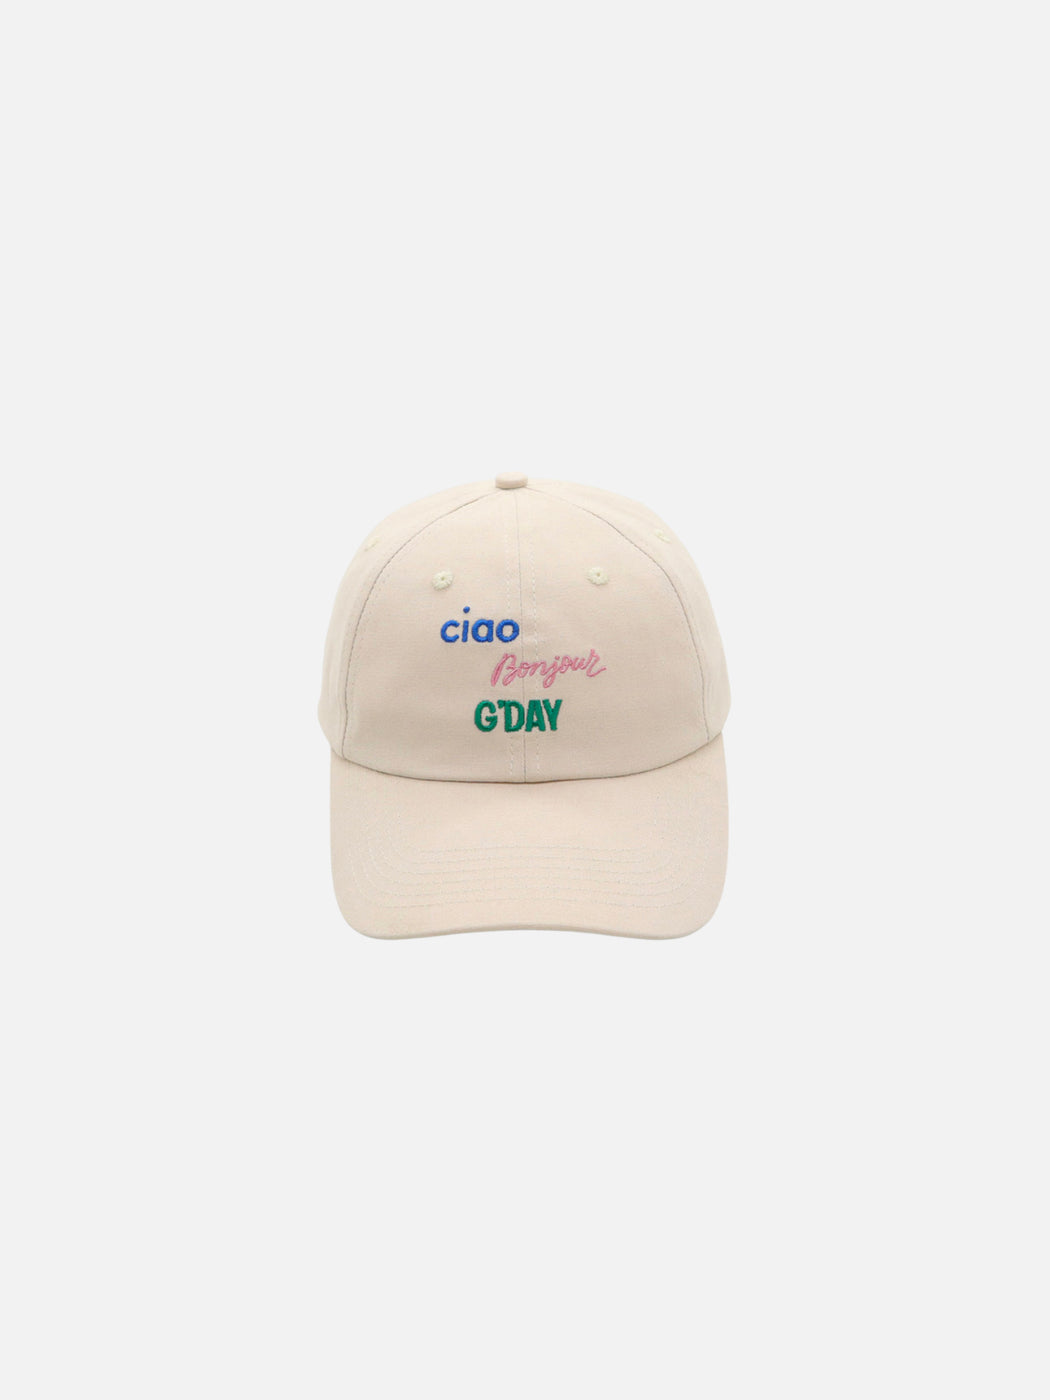 a cap for kids with the words ciao bonjour g'day written on the front